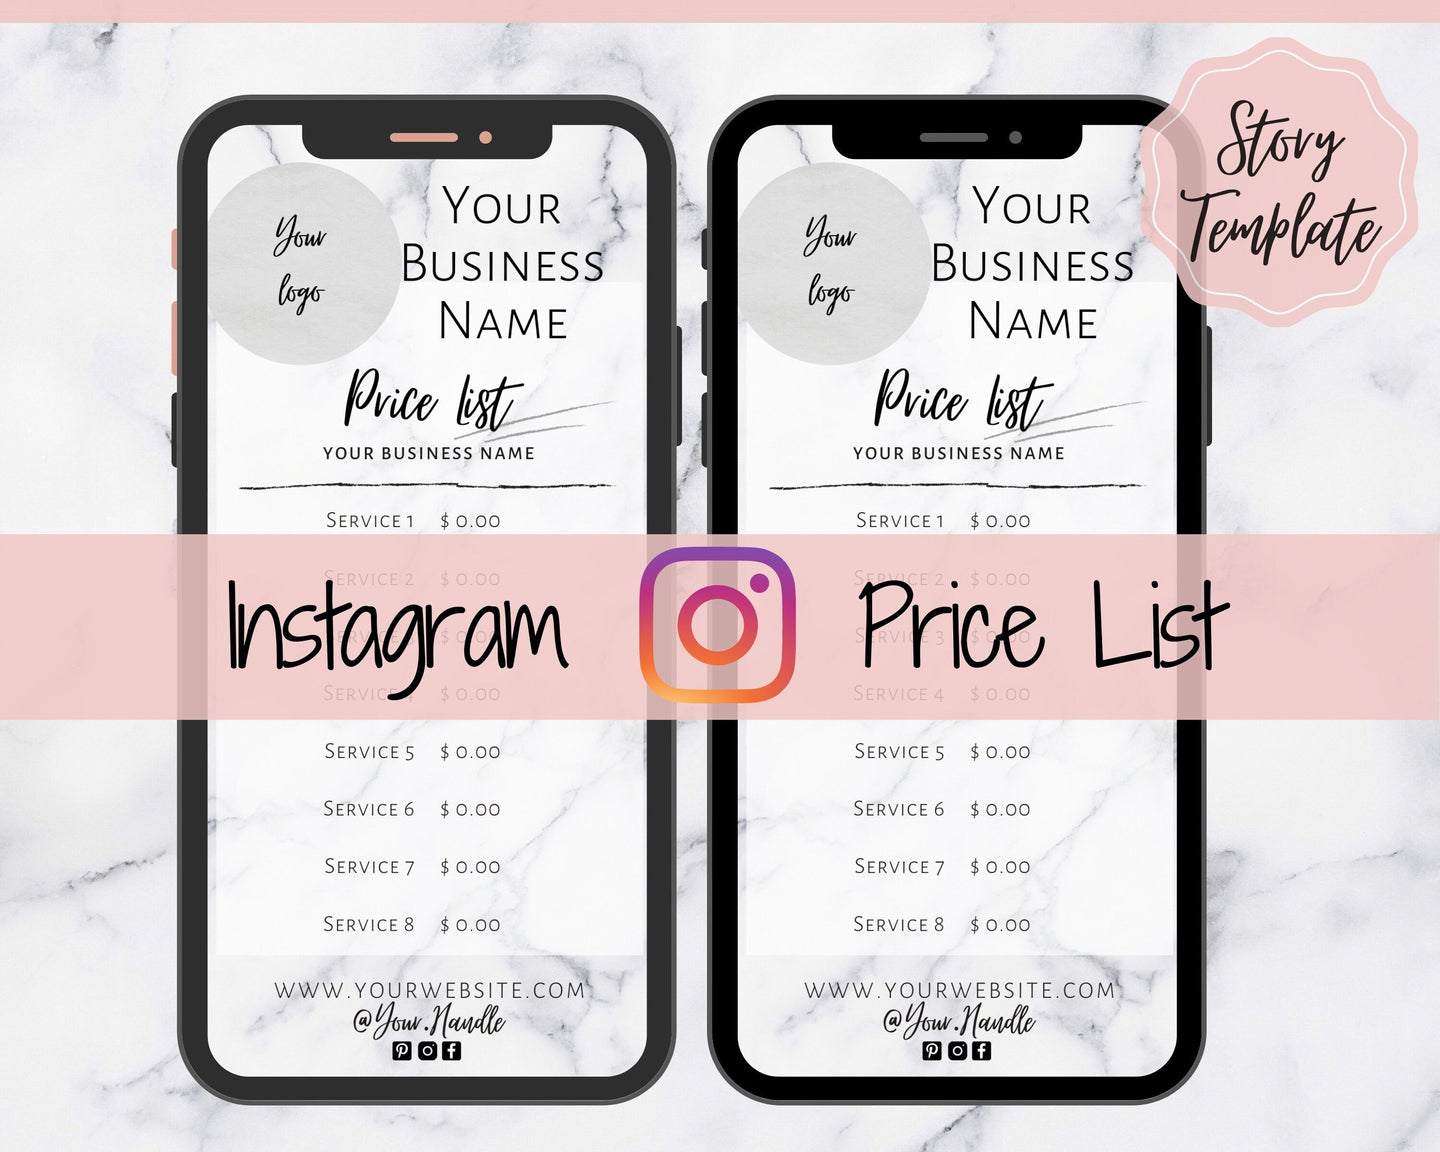 Instagram Template PRICE LIST Instagram Story! Price List Template for your feed, IG Stories, Highlights. Instagram Marketing, Social Media | White Marble